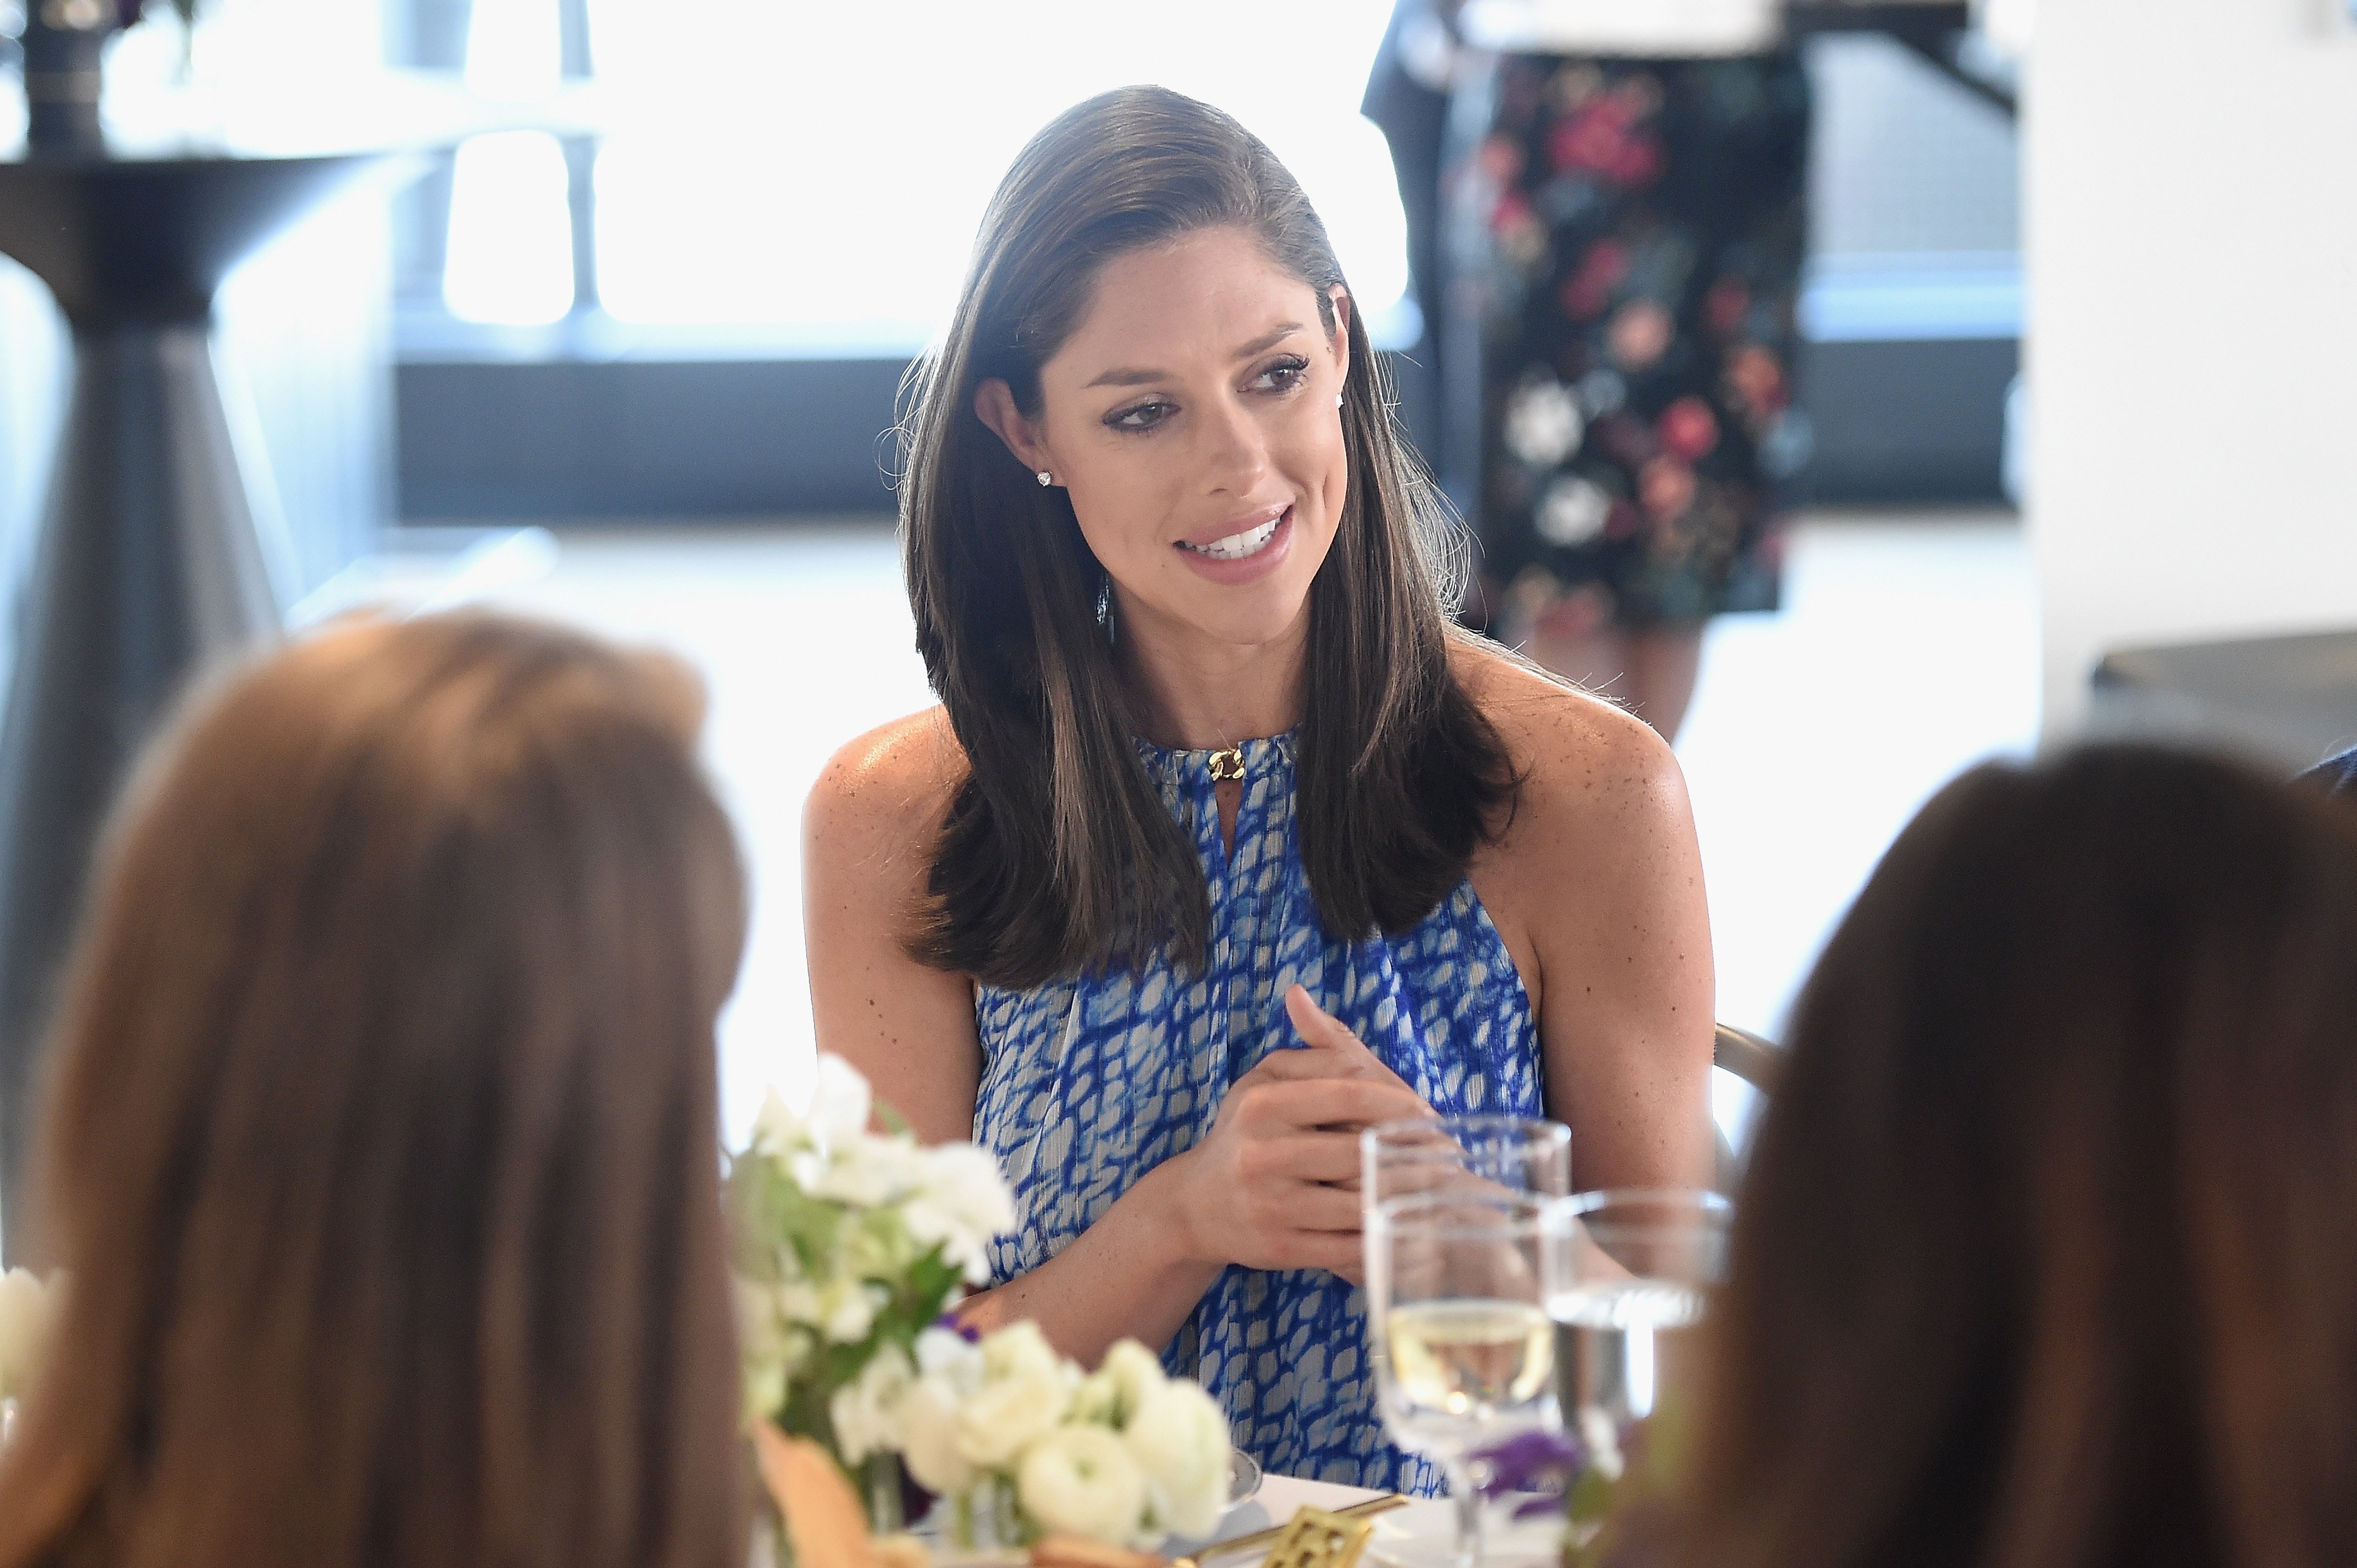 Journalist Abby Huntsman attends a luncheon hosted by Glamour and Facebook to discuss the 2016 election at Samsung 837 in NYC on July 11, 2016 | Photo: Getty Images